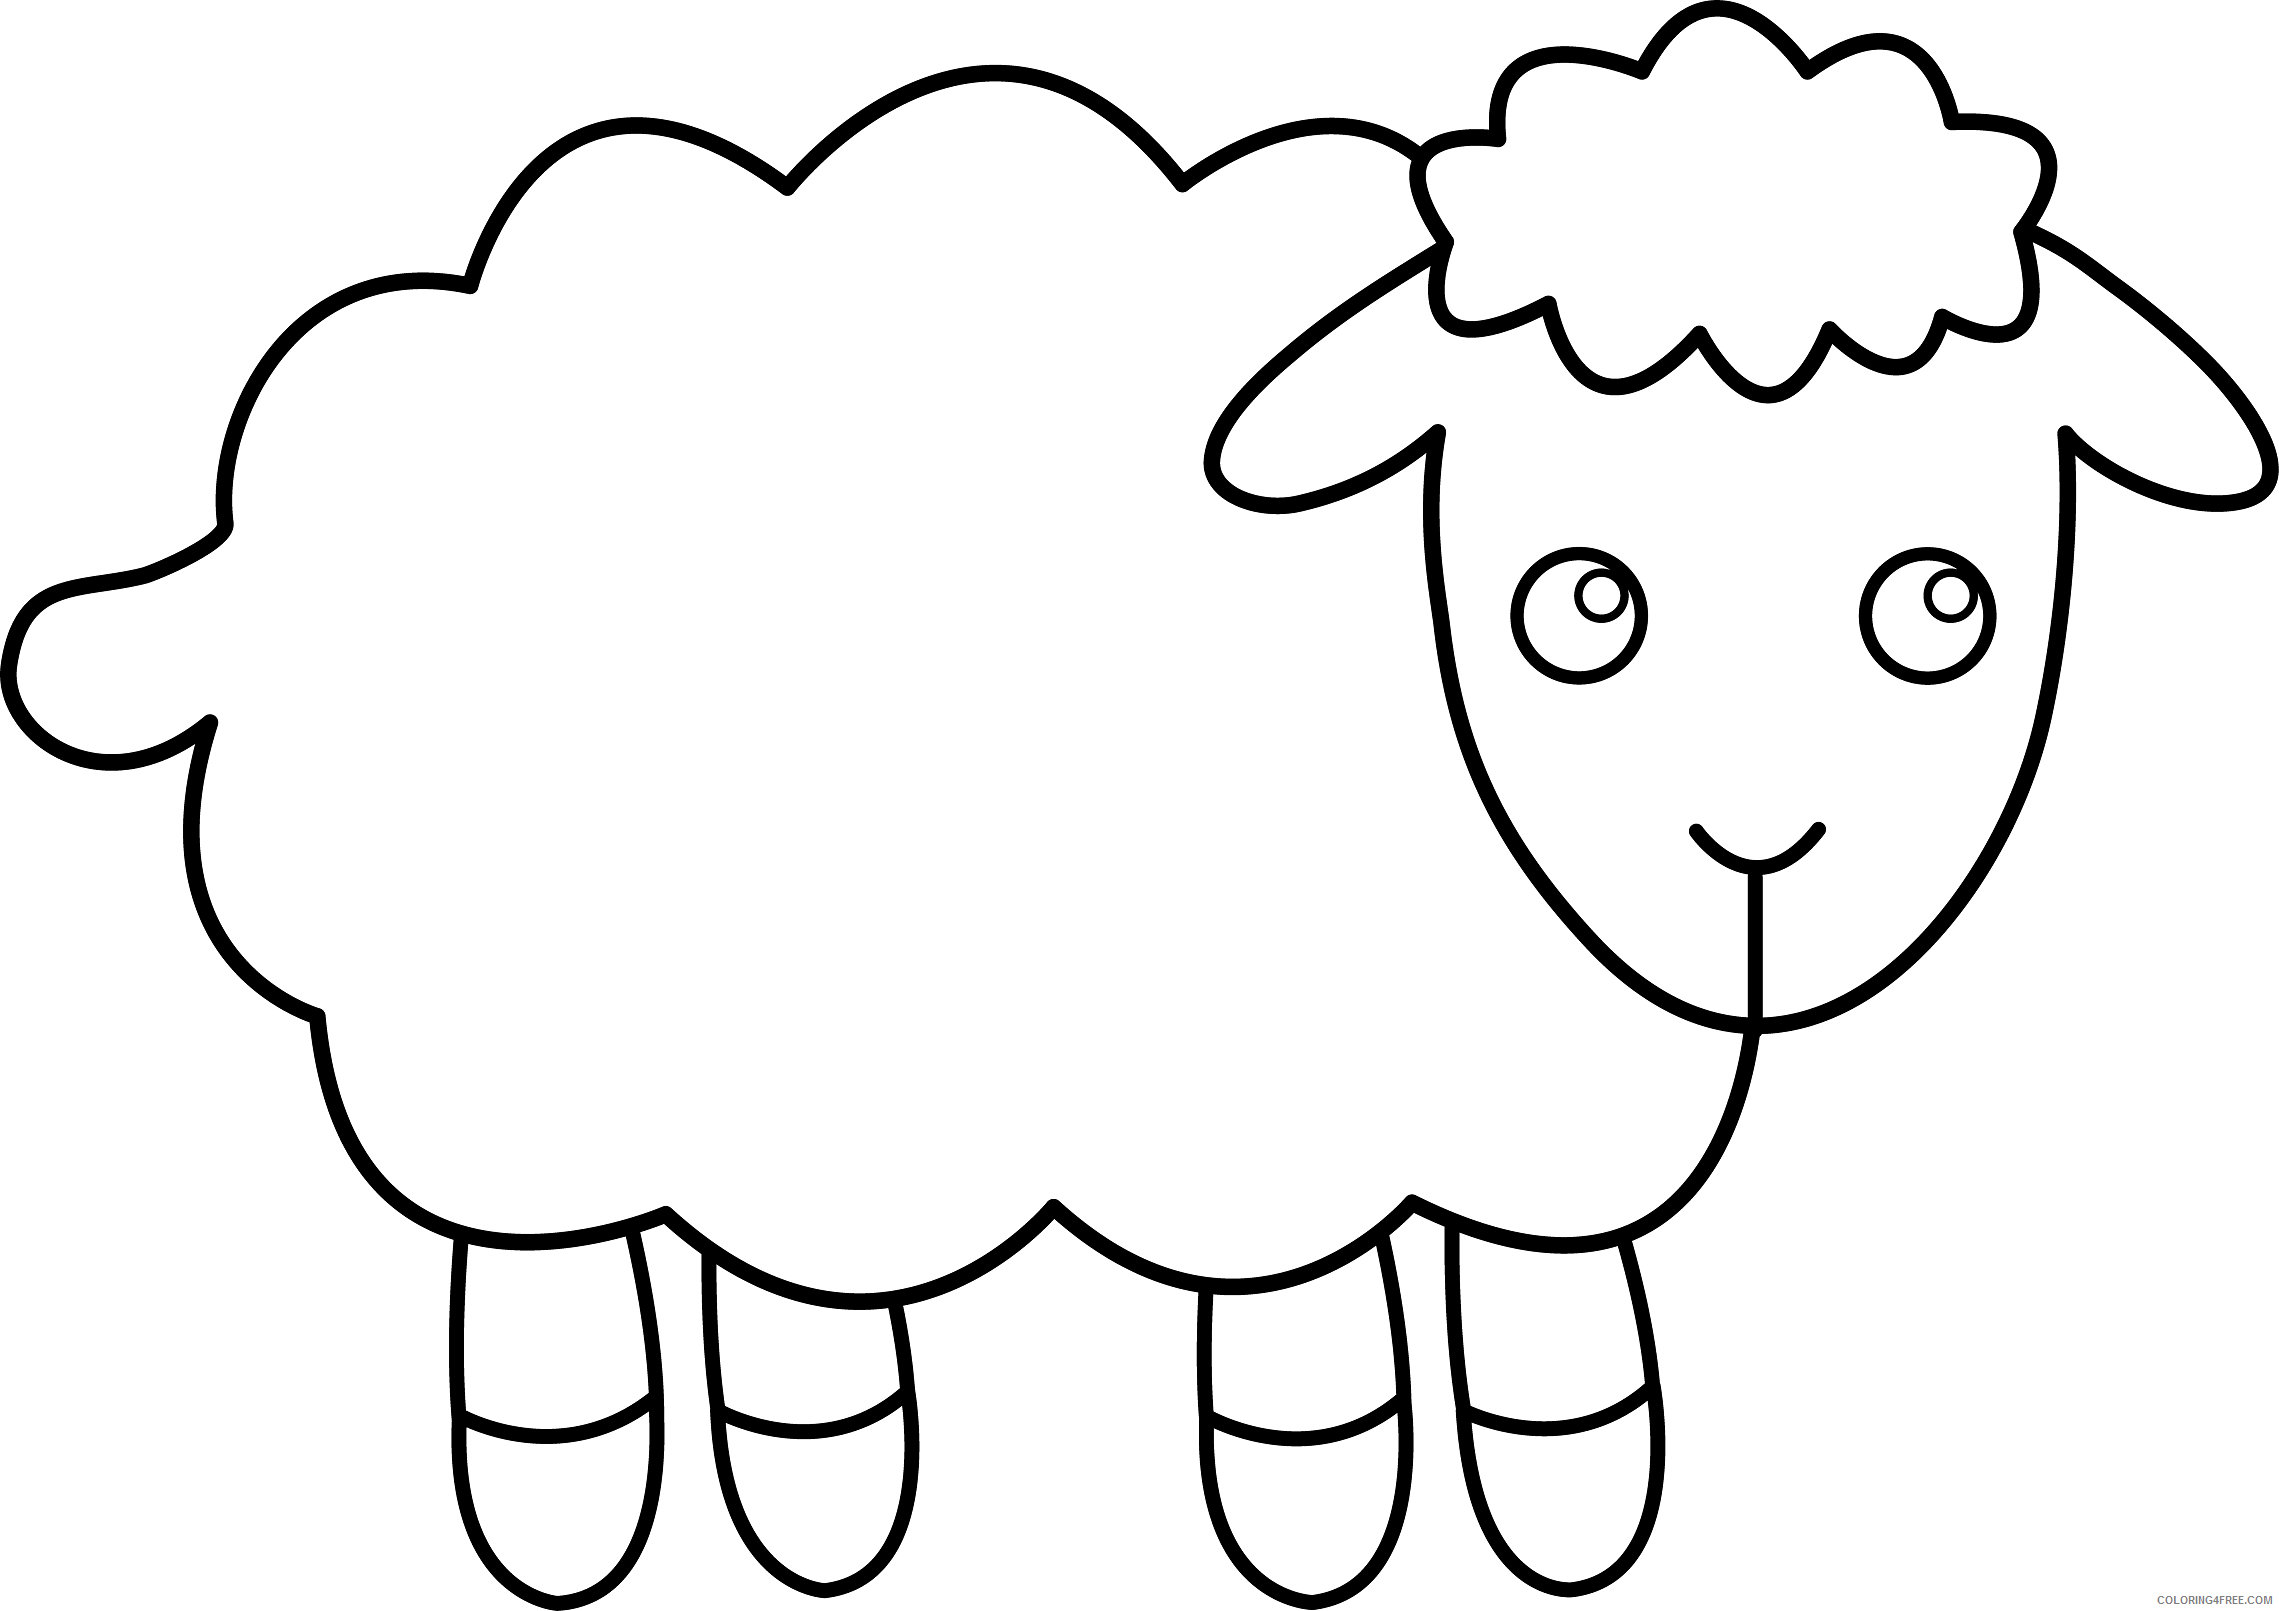 Sheep Outline Coloring Pages Black Sheep Bfree Printable Coloring4free 